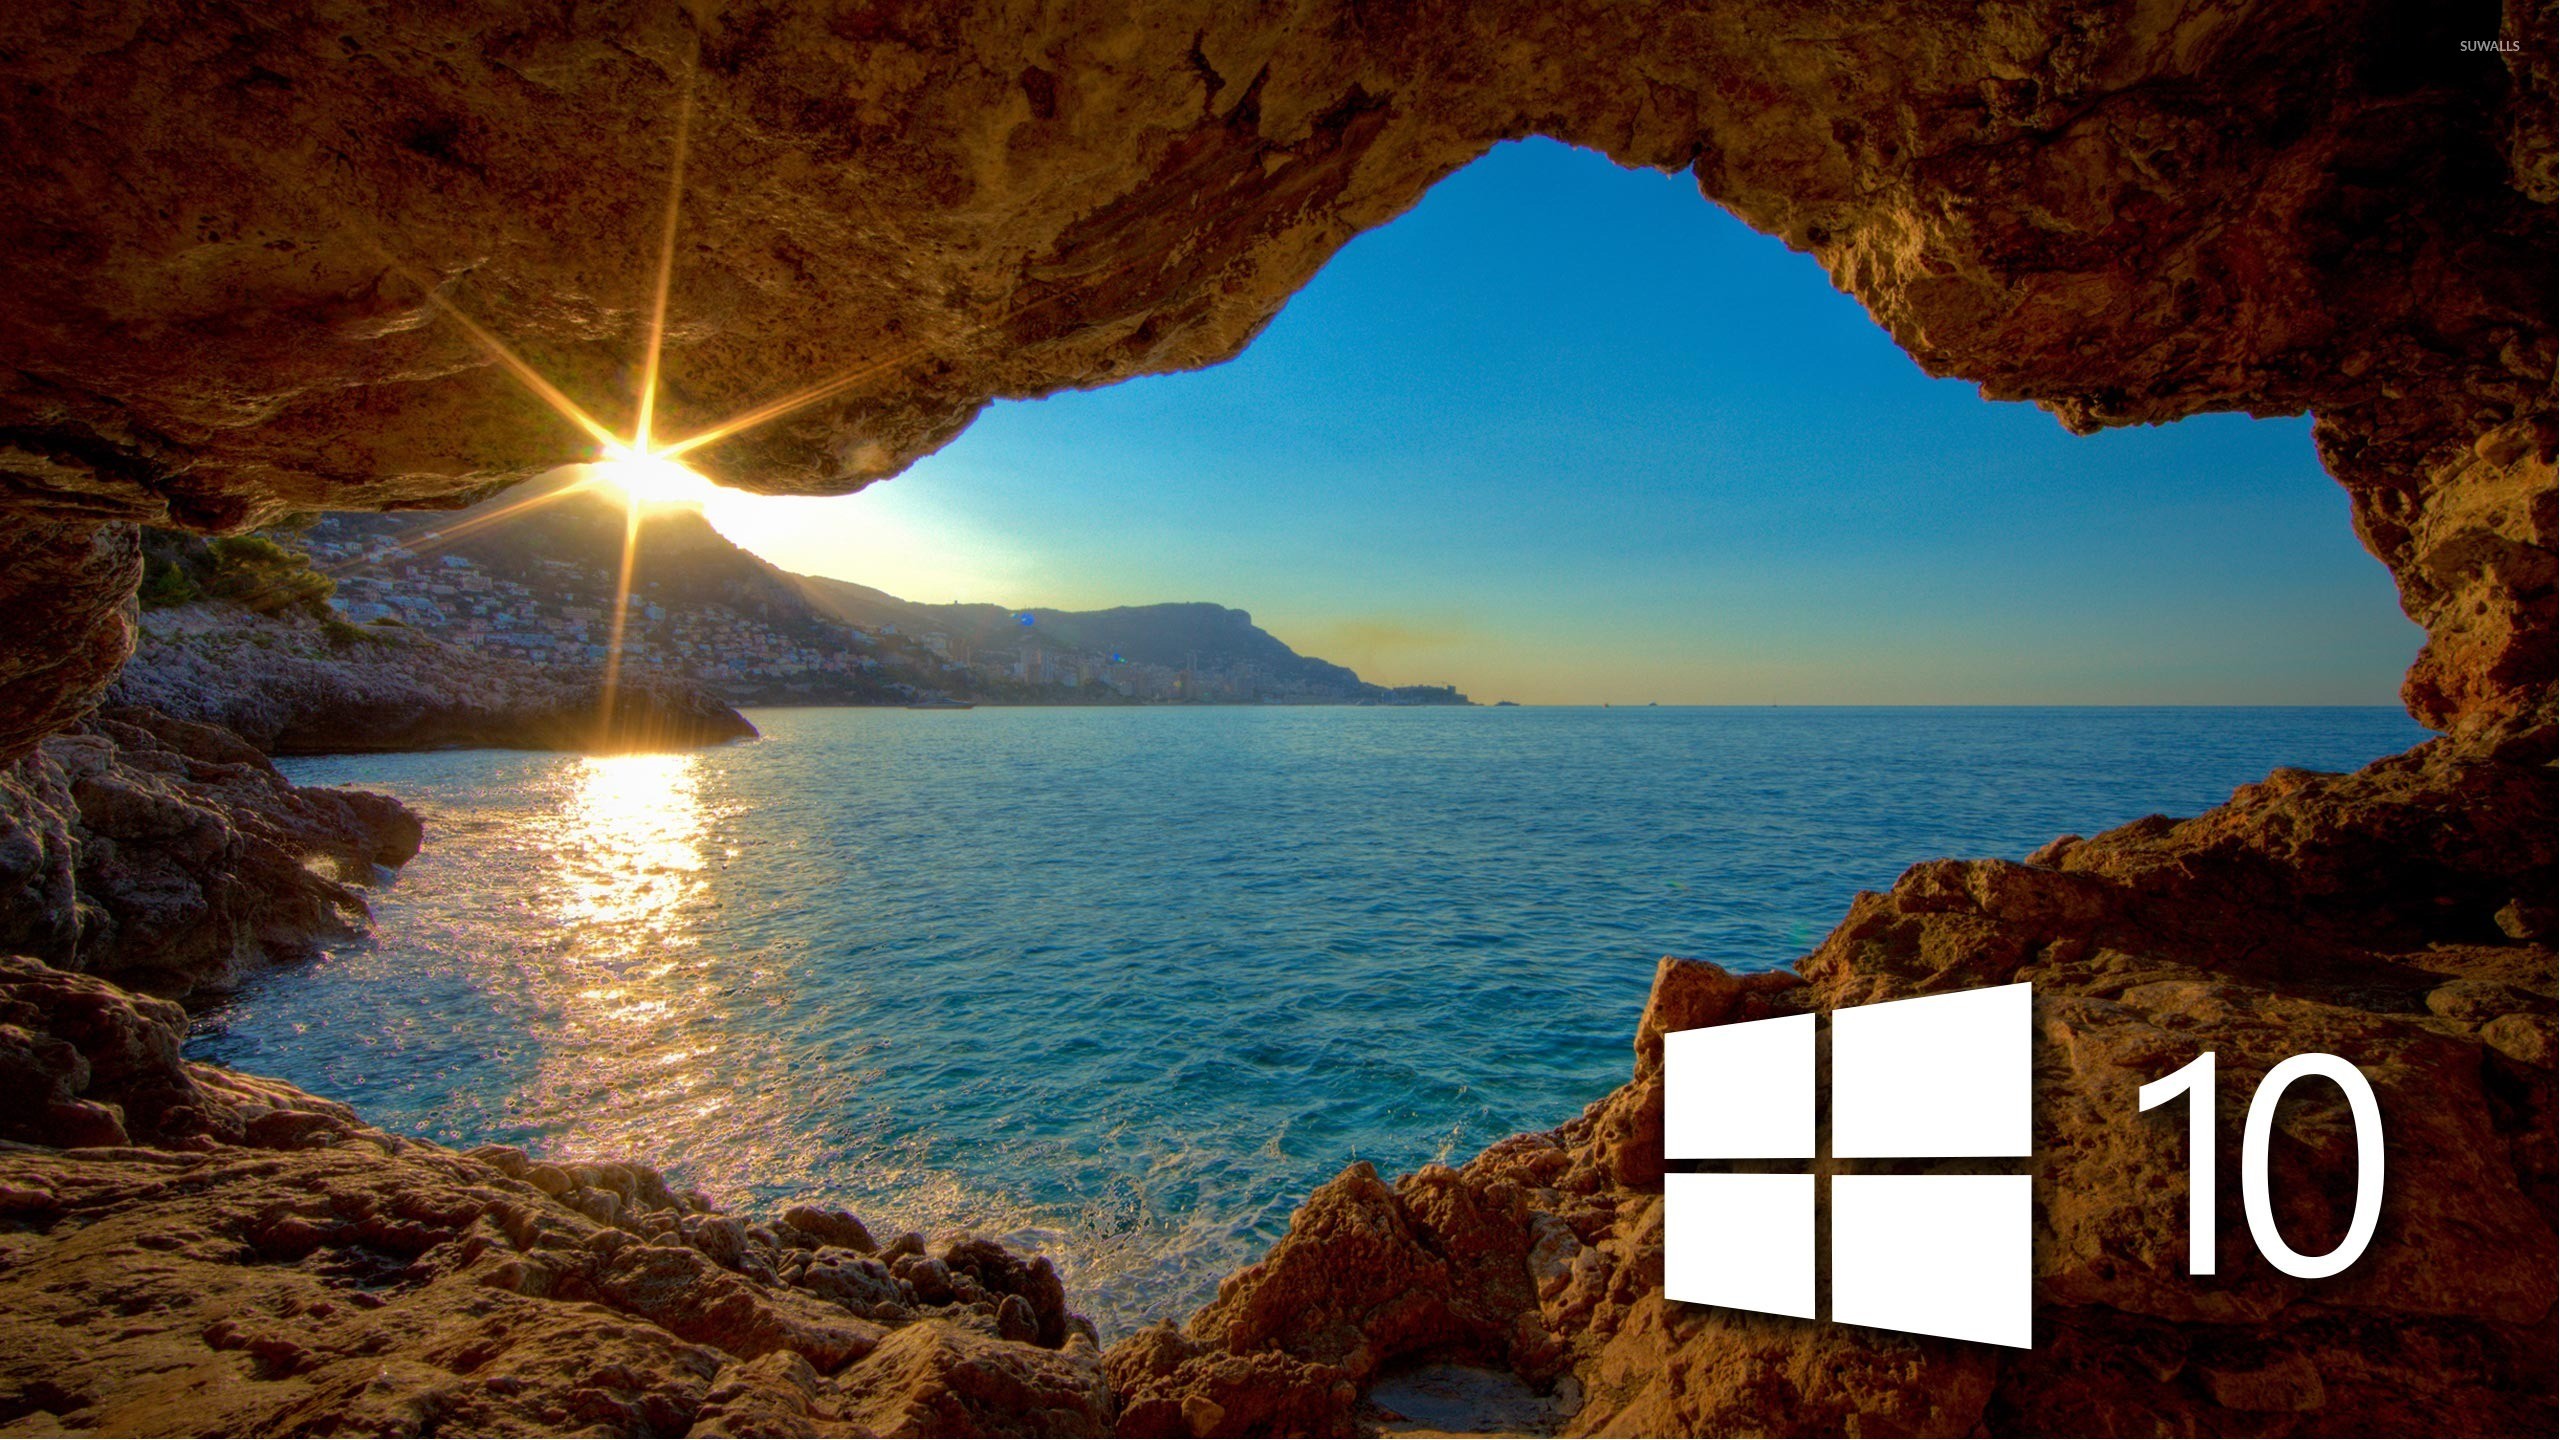 photo grid free download for laptop windows 10